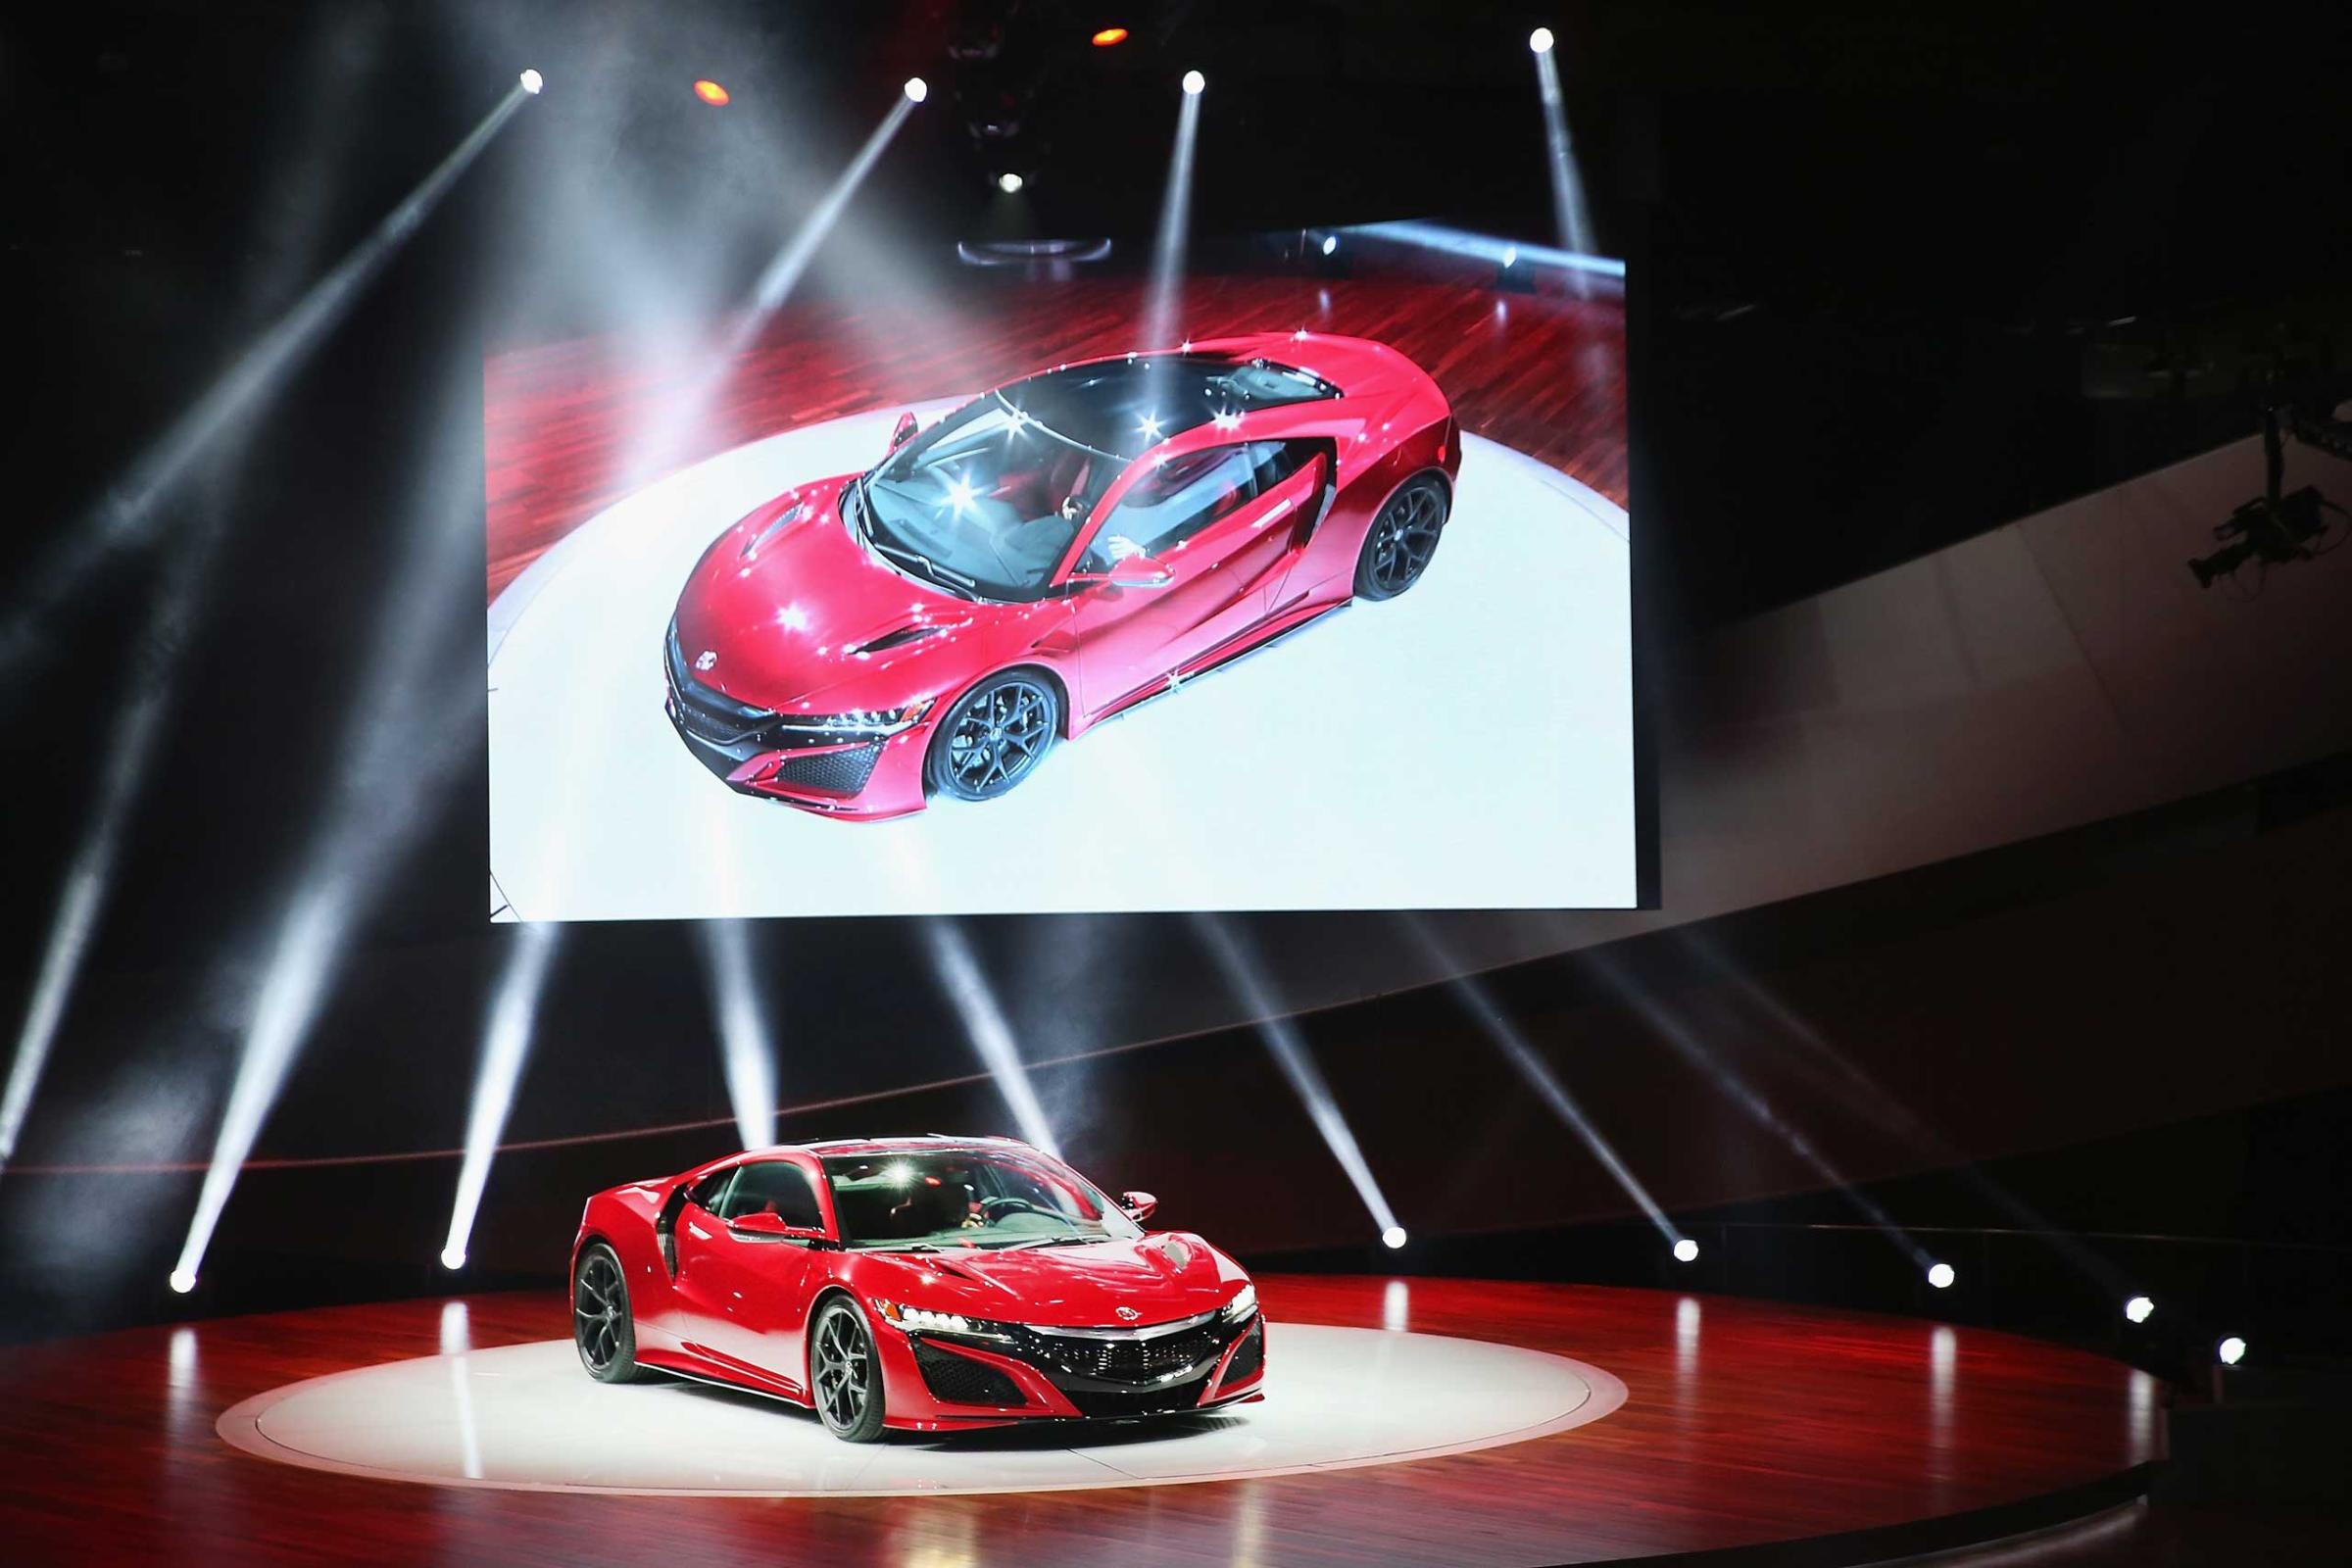 Acura introduces the new NSX at the (NAIAS) on January 12, 2015 in Detroit.